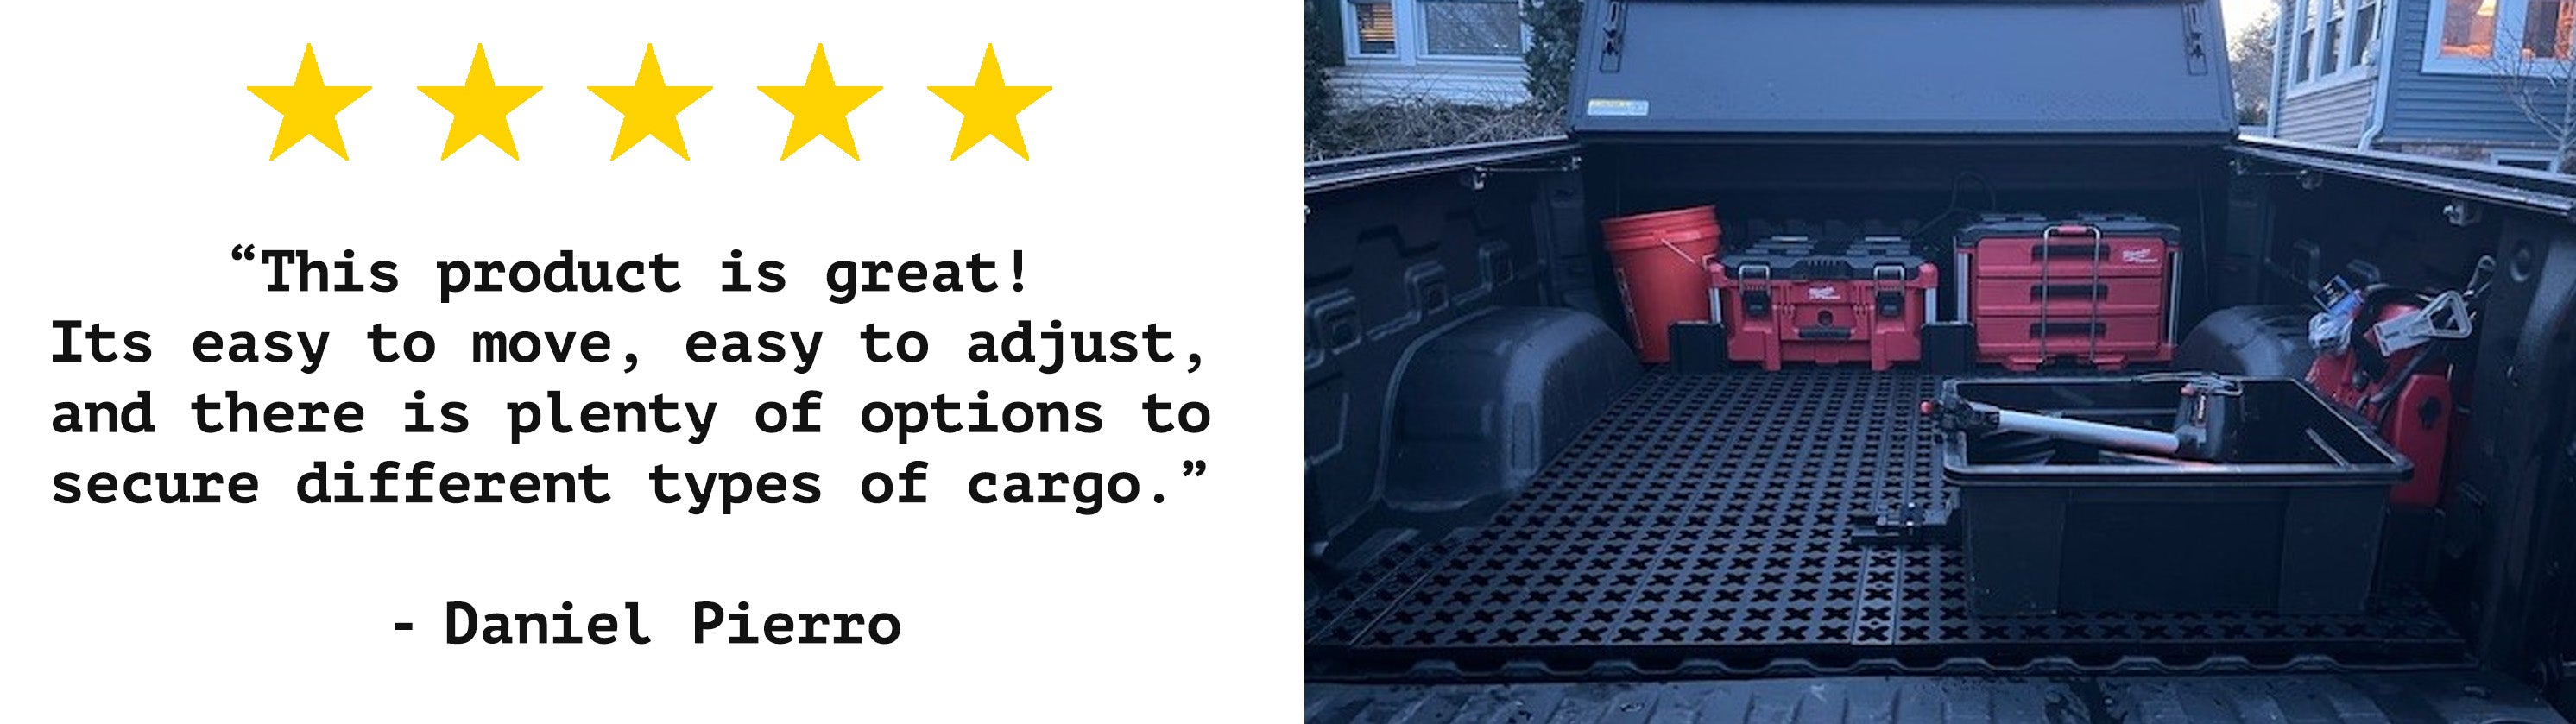 "The product is great! Its easy to move, easy to adjust, and there is plenty of otions to secure different types of cargo." - Daniel P.